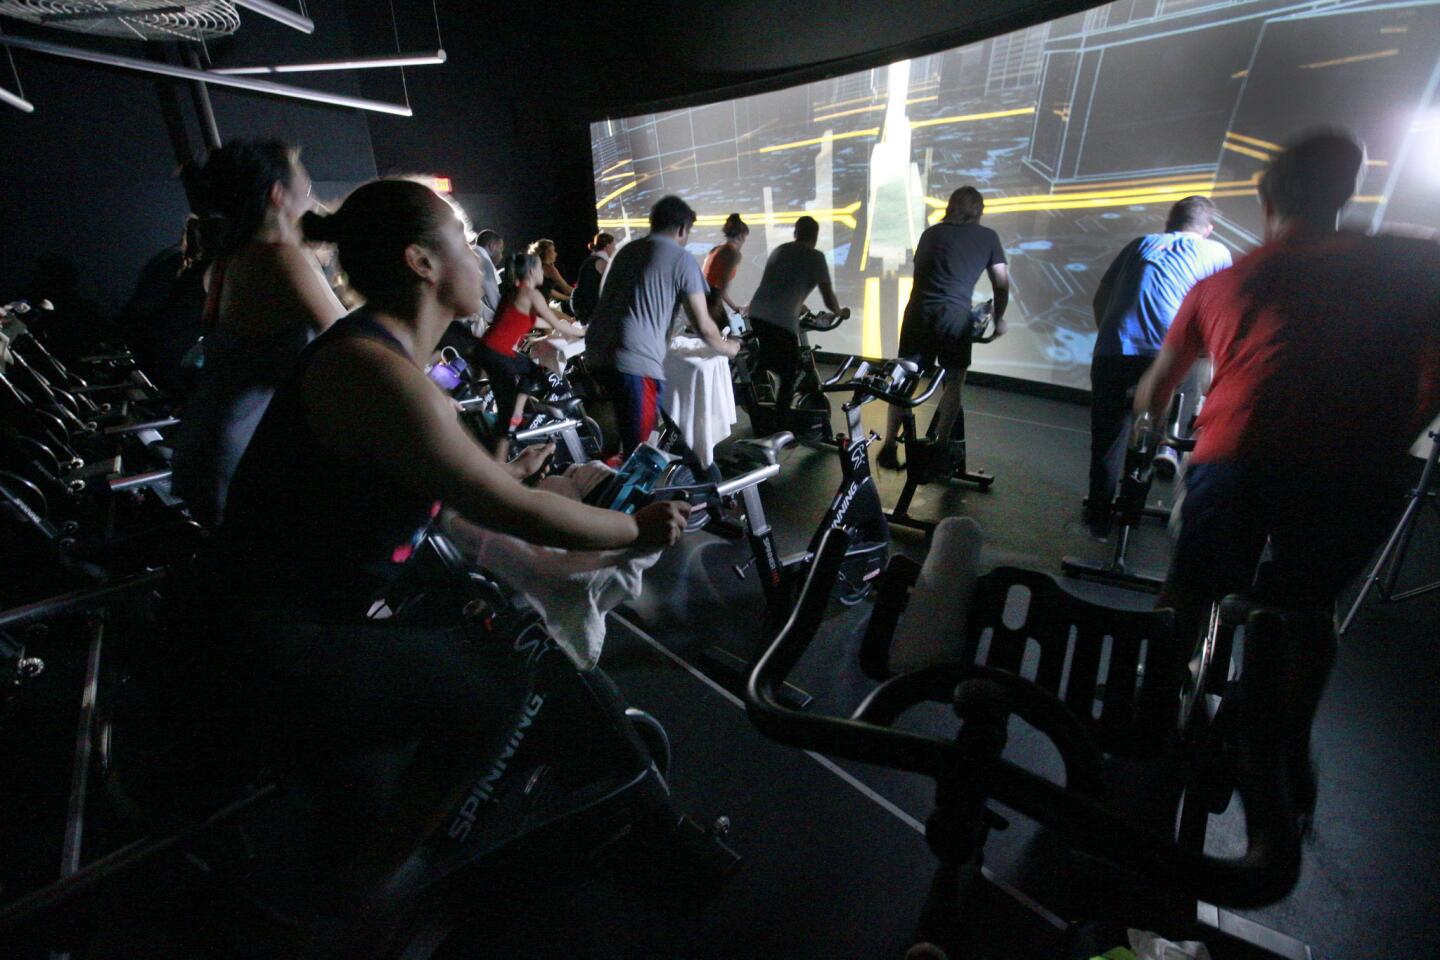 The Trip combines cinematic scenery with a cycling studio class